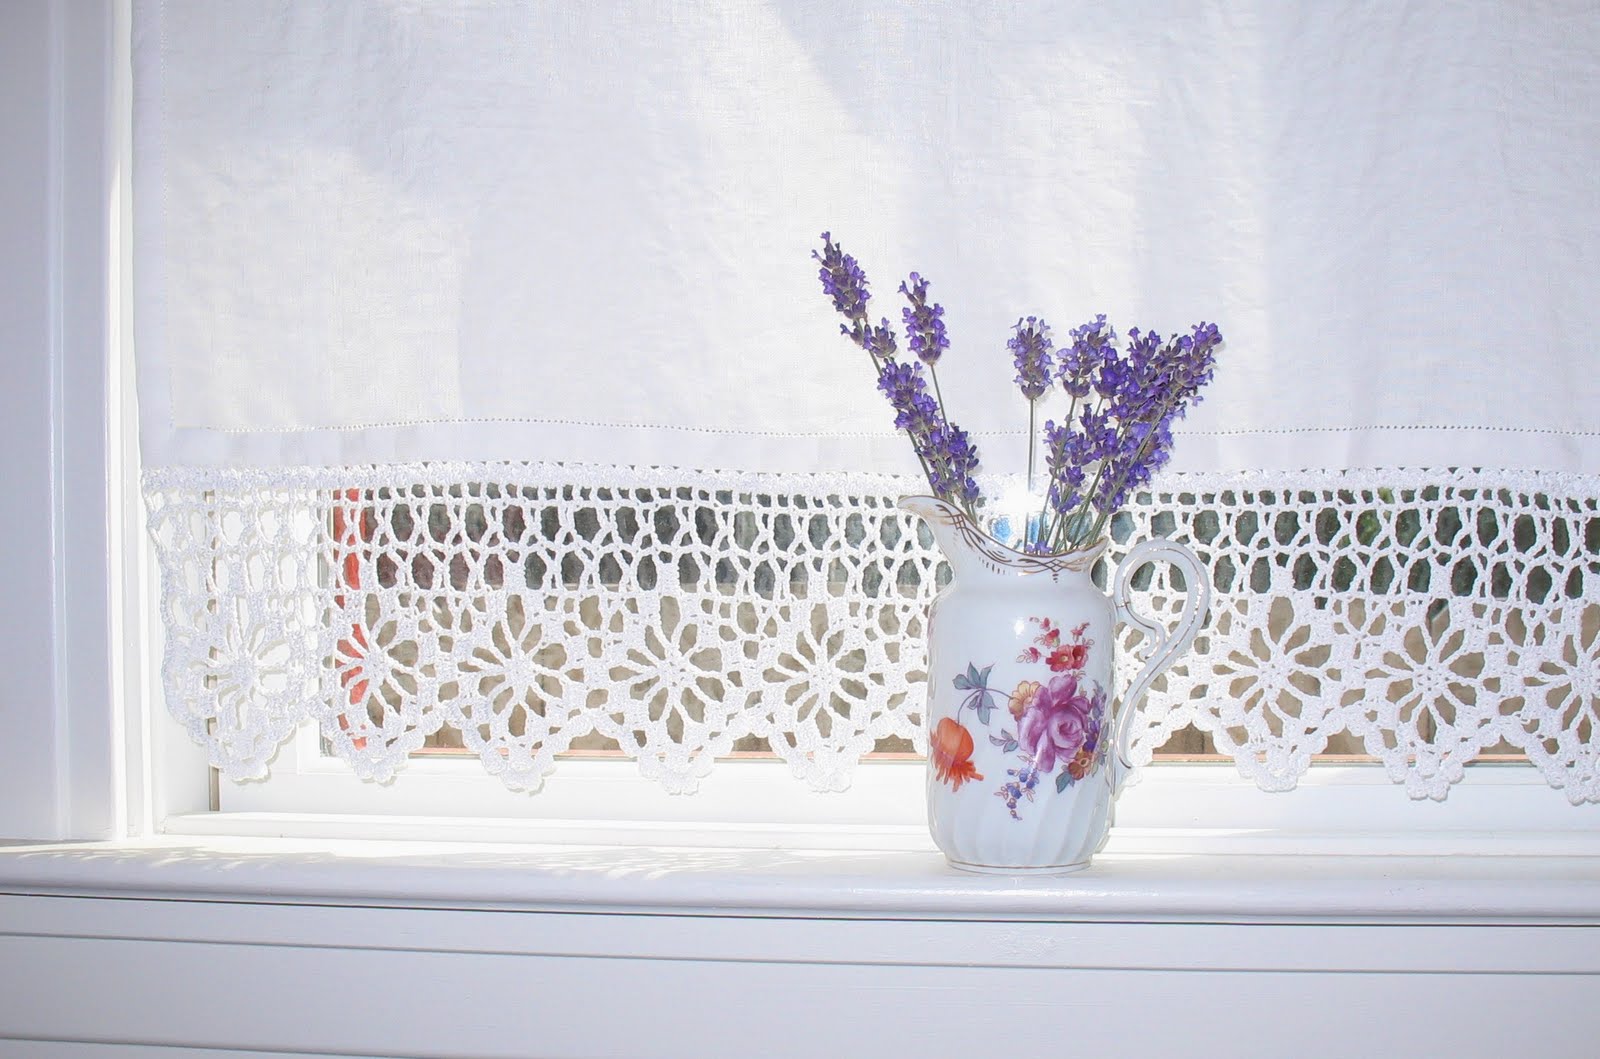 Amy Brumley: Crocheted Lace Curtains